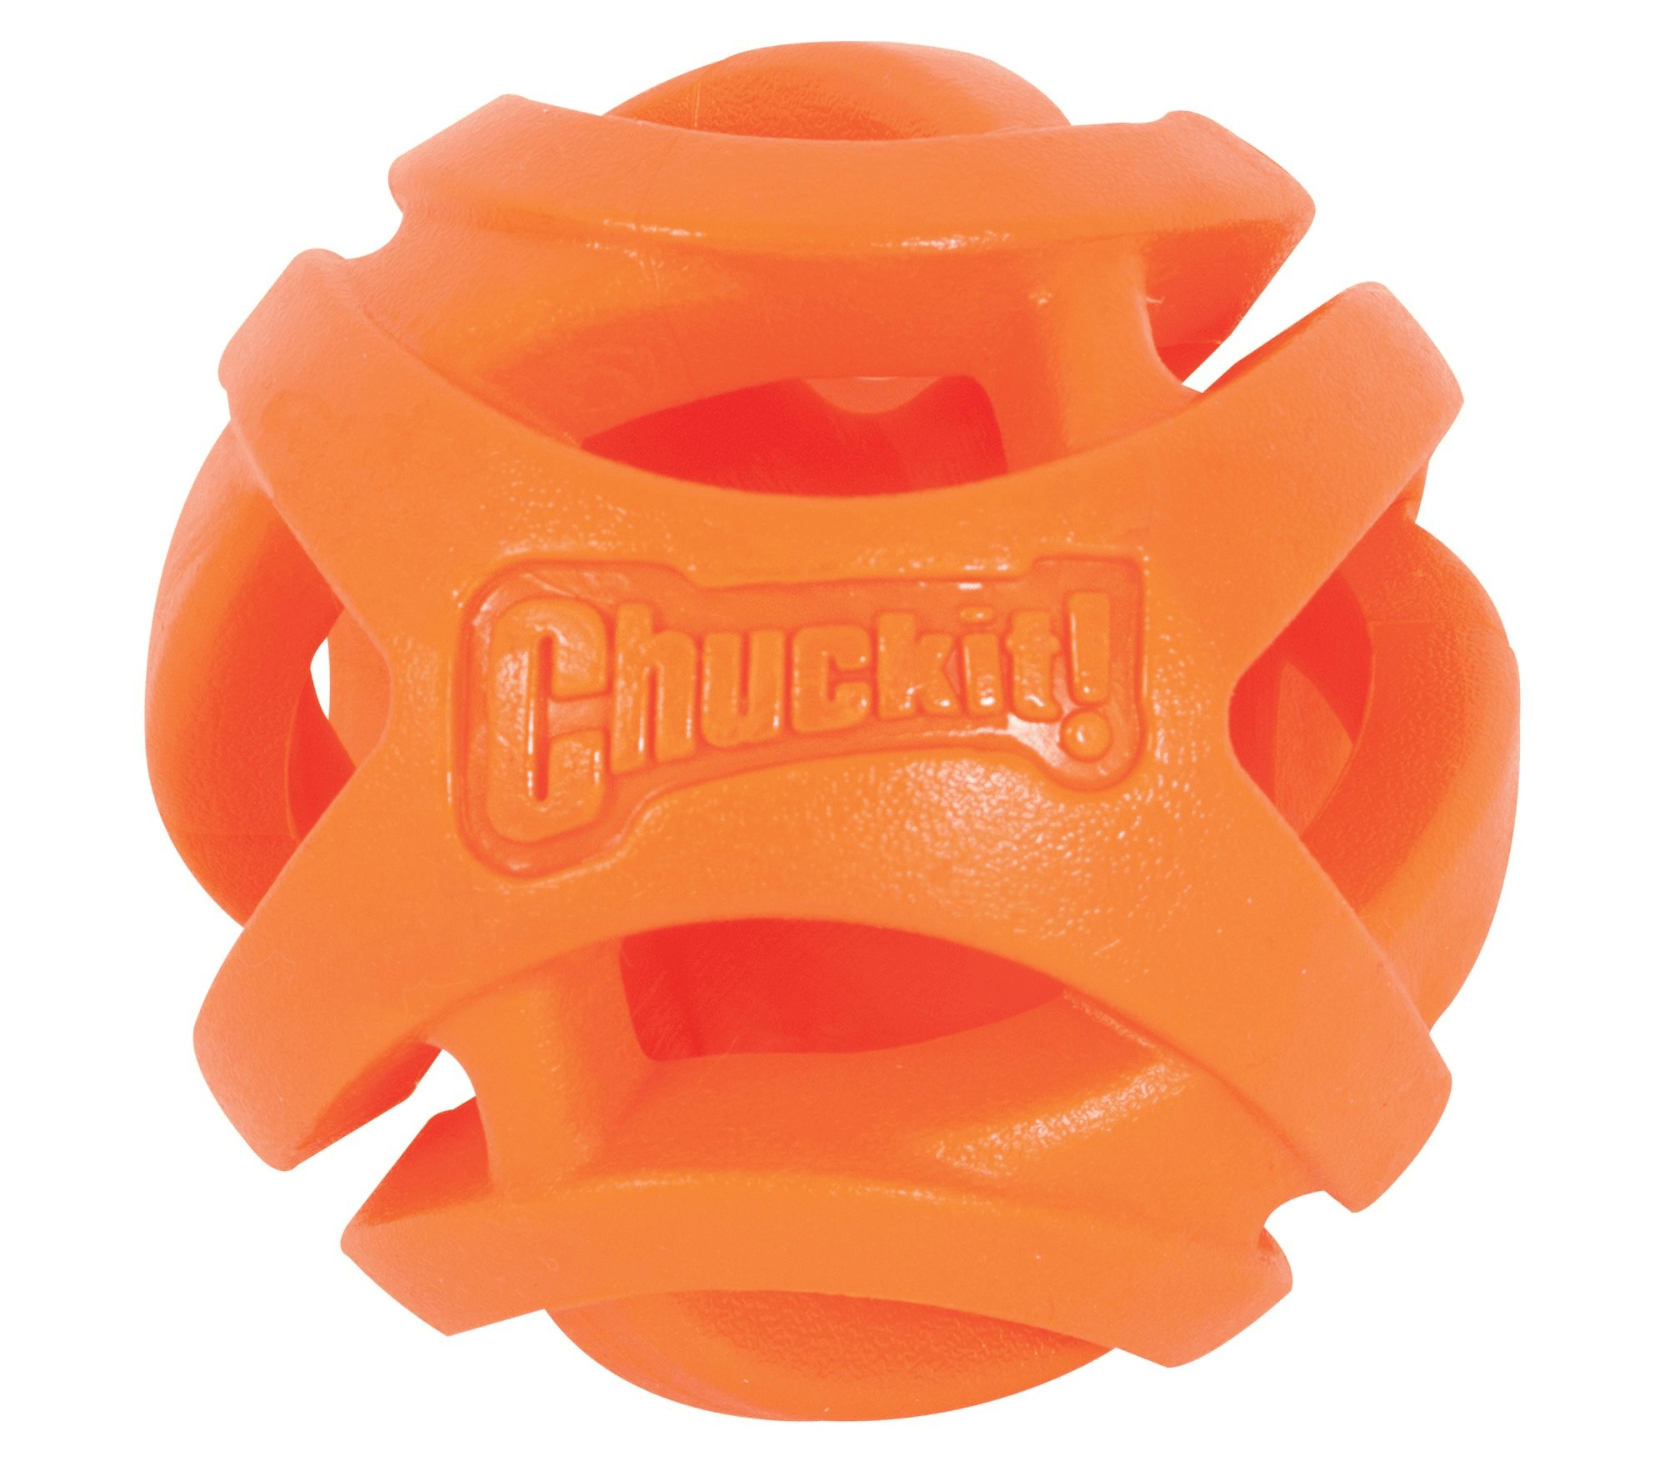 Chuckit! Breathe Right Fetch Ball (Single) - Pet's Play Toy Store